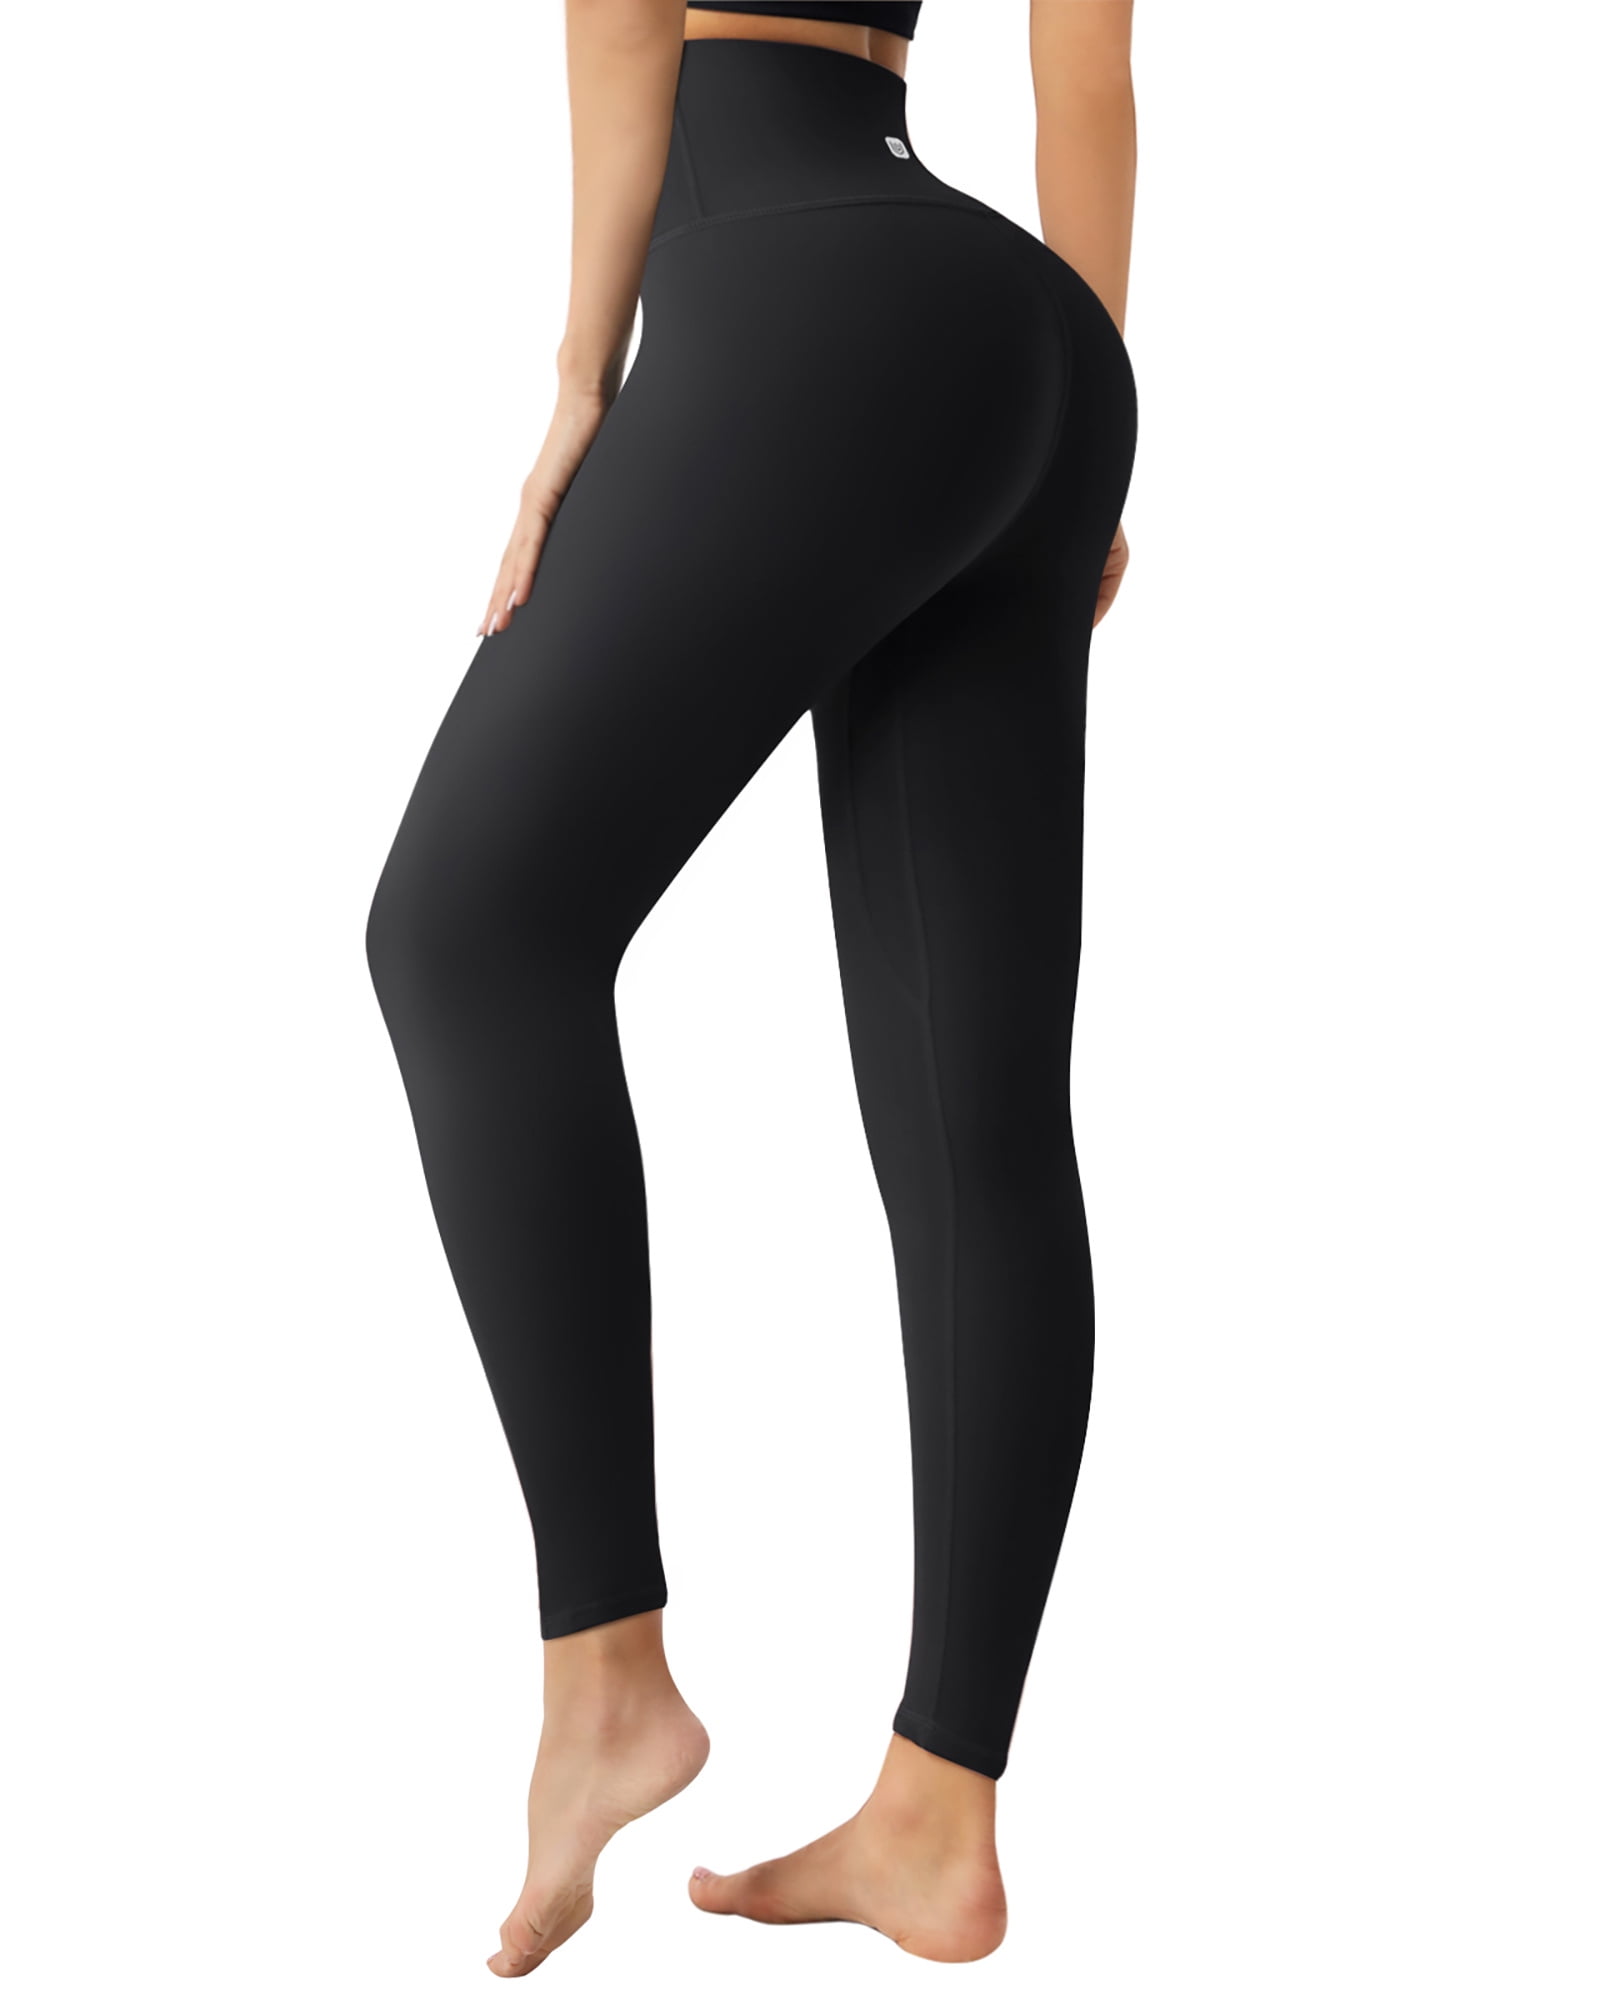 Ukaste Women's Studio Essential Mid-Rise Yoga Leggings 25 - No Front Seam  Brushed Soft Workout Active Tights (Black, 4) at  Women's Clothing  store